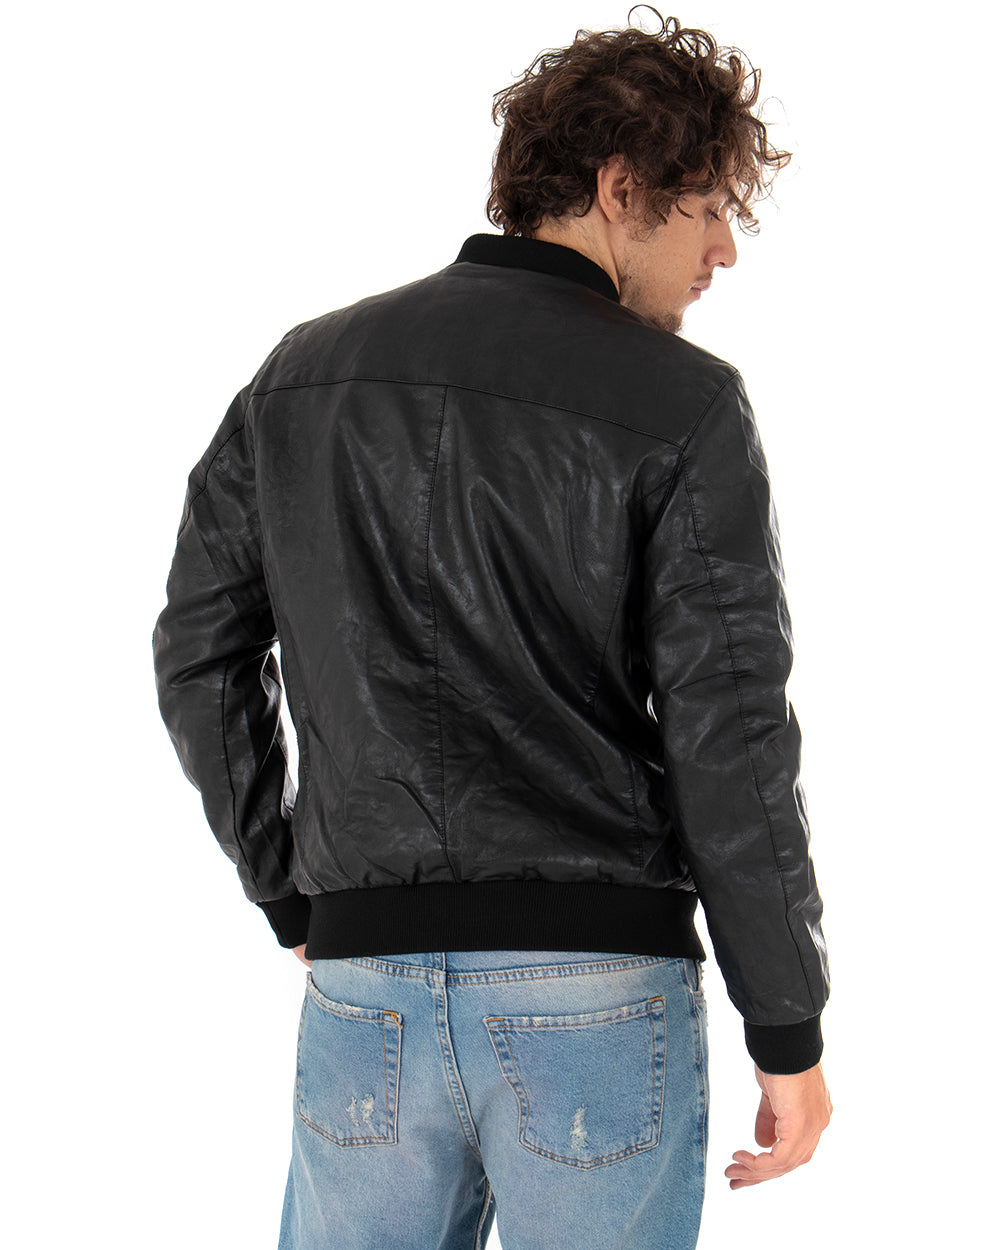 Men's Faux Leather Jacket Solid Color Black College Long Sleeve GIOSAL